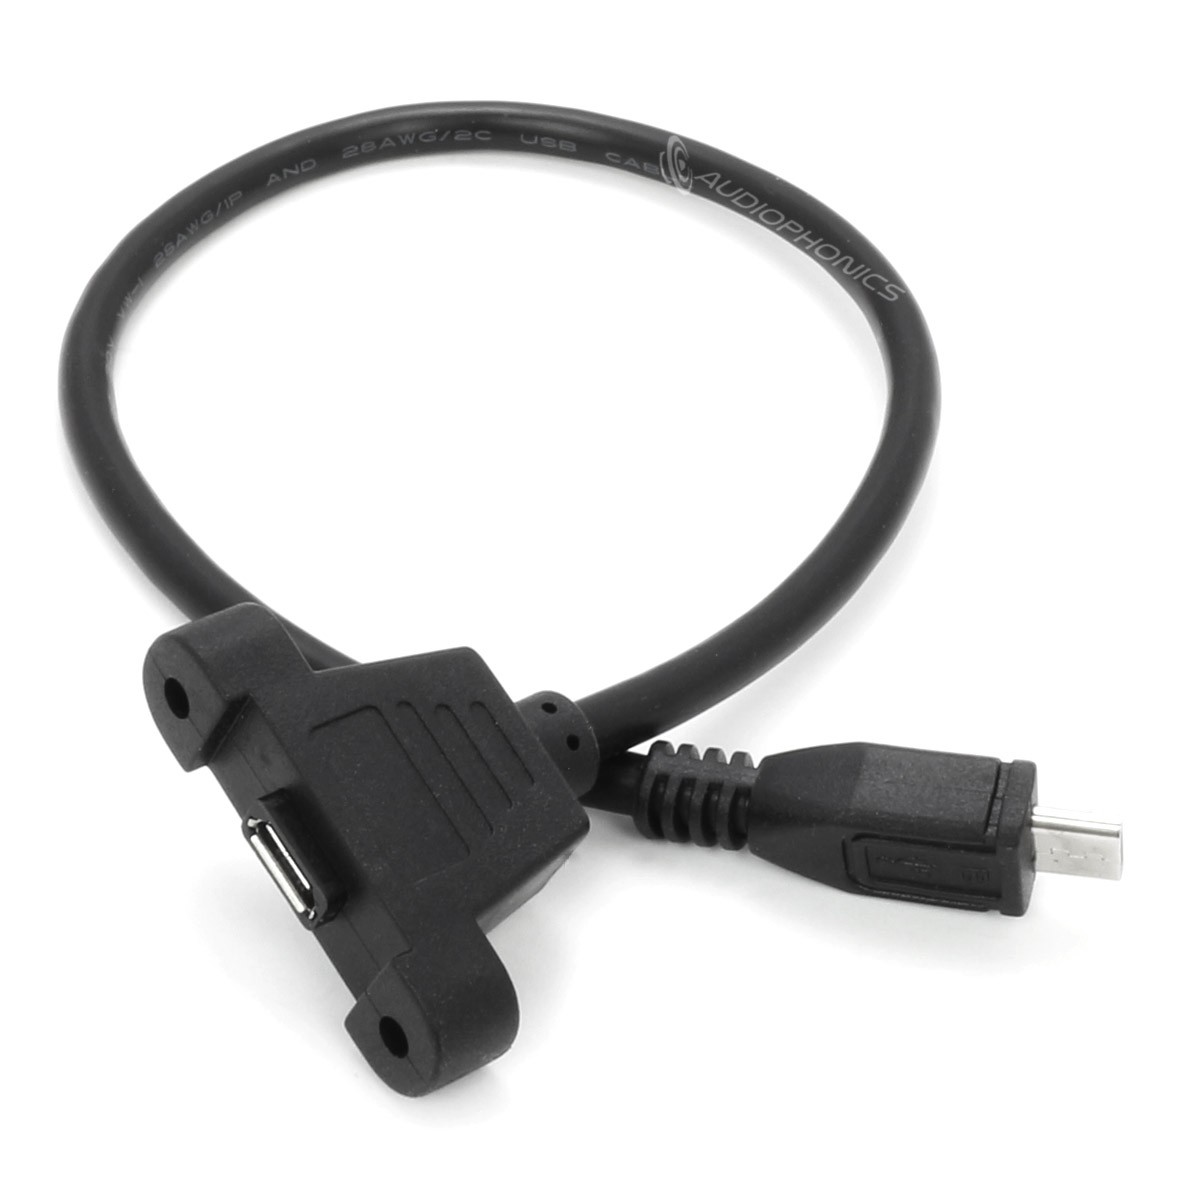 USB A Jack to Micro USB B Jack Round Panel Mount Adapter